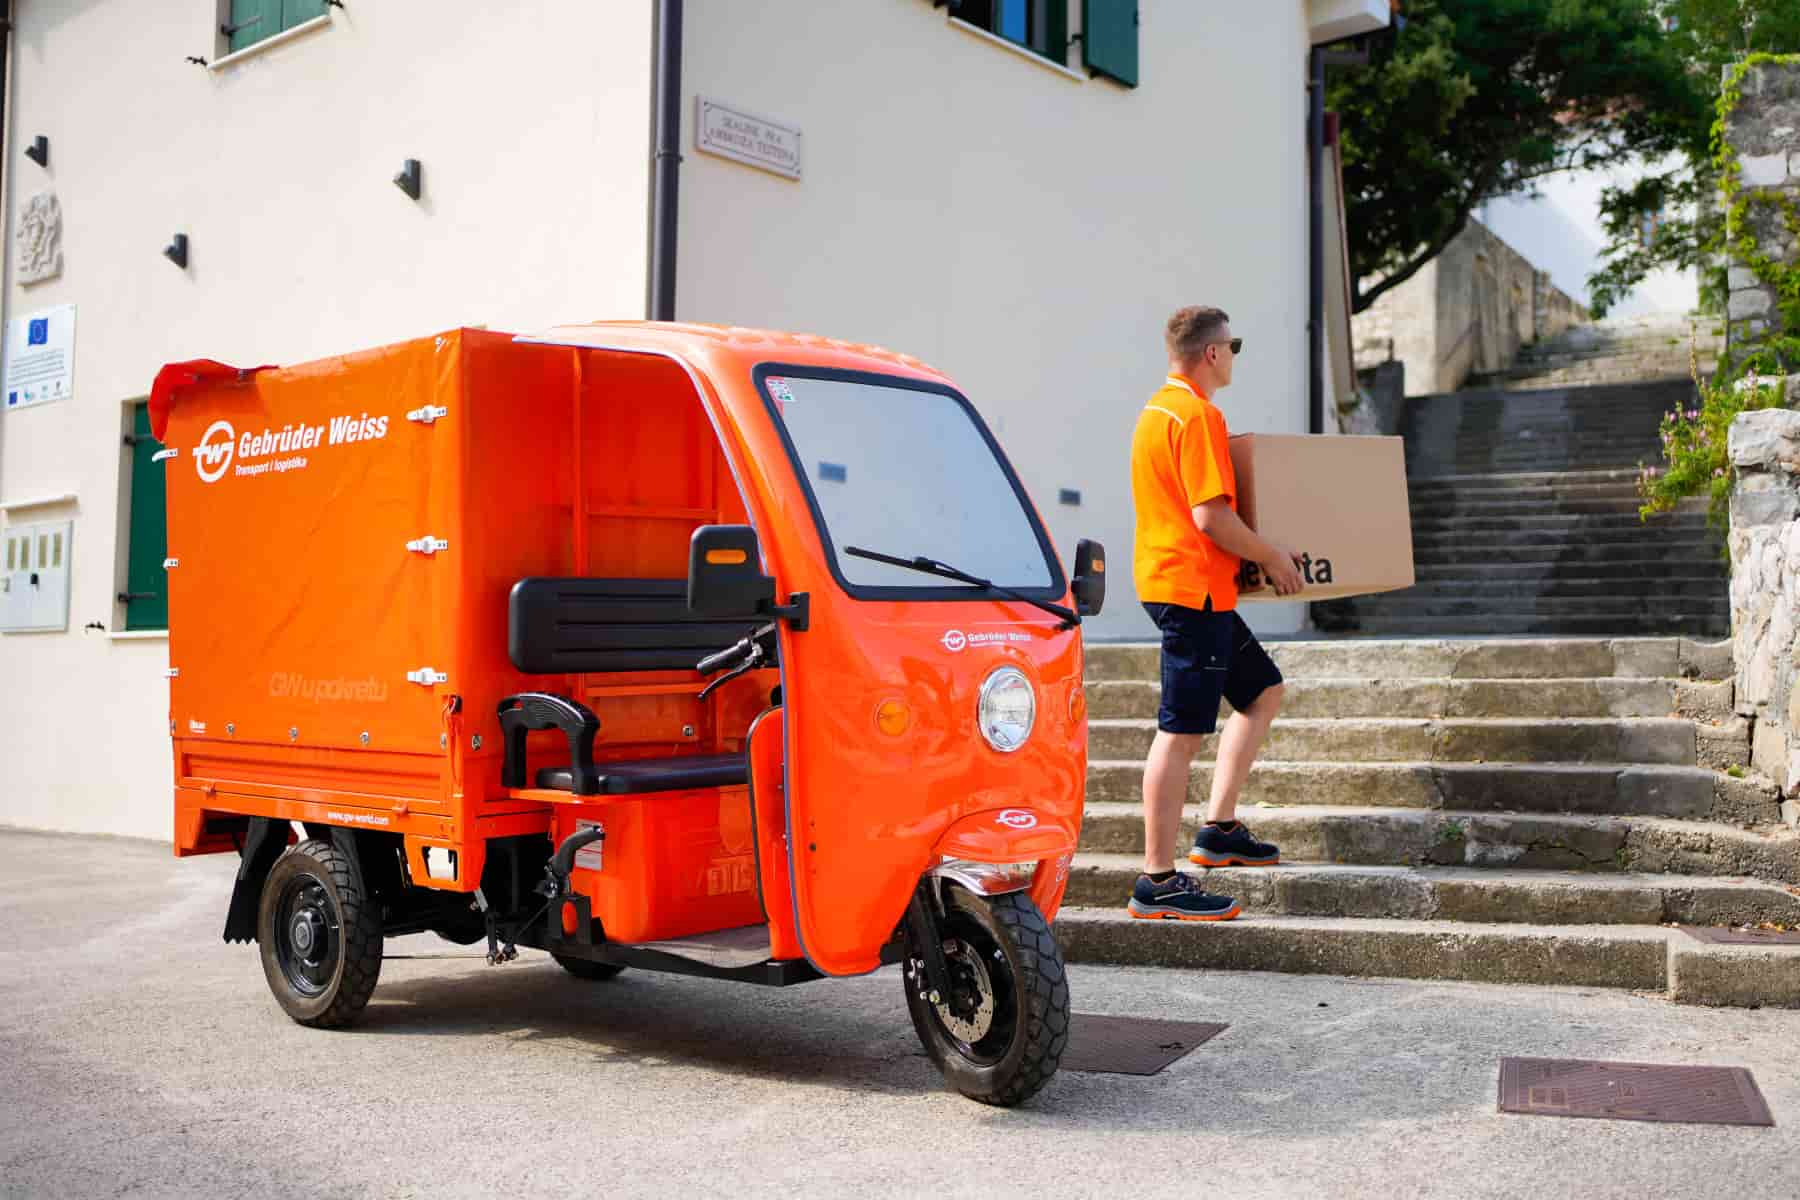 Eco-Friendly Delivery Services on Croatian Islands: Gebrüder Weiss ...